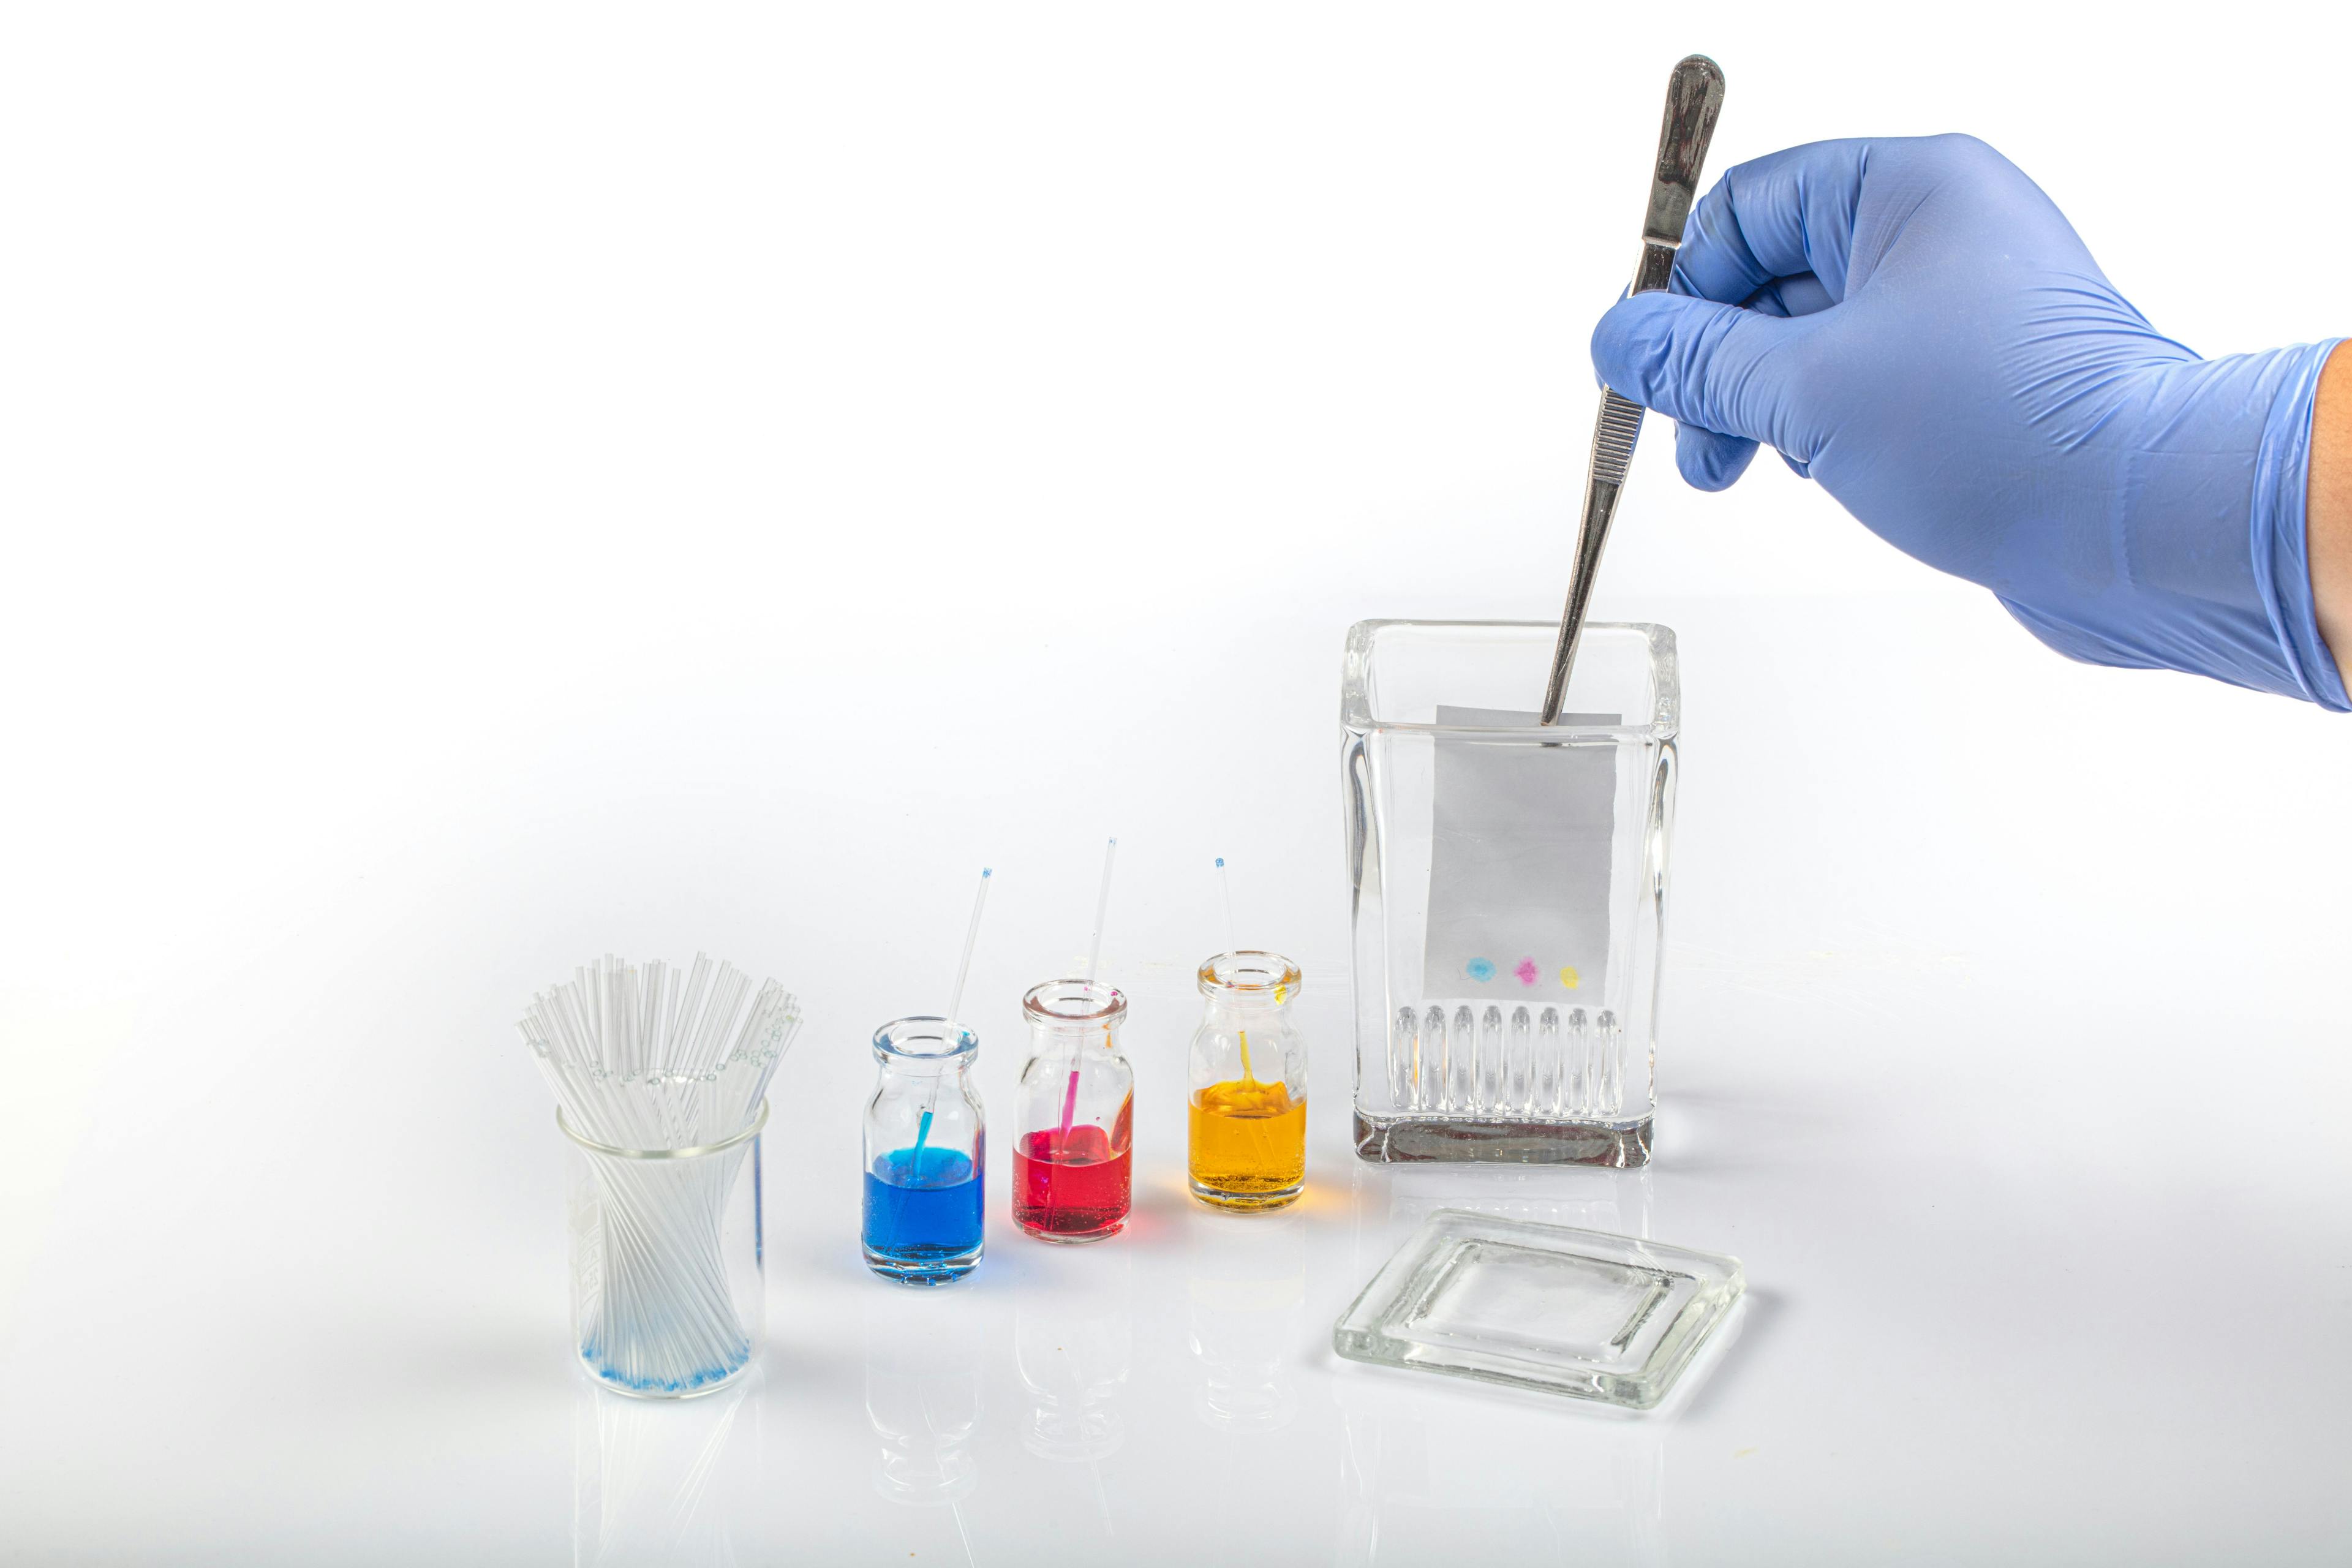 Thin layer chromatography equipments include jar, silica gel, capillary and compounds. TLC method used in purity analysis of compounds in chemistry laboratory. | Image Credit: © mehmet - stock.adobe.com